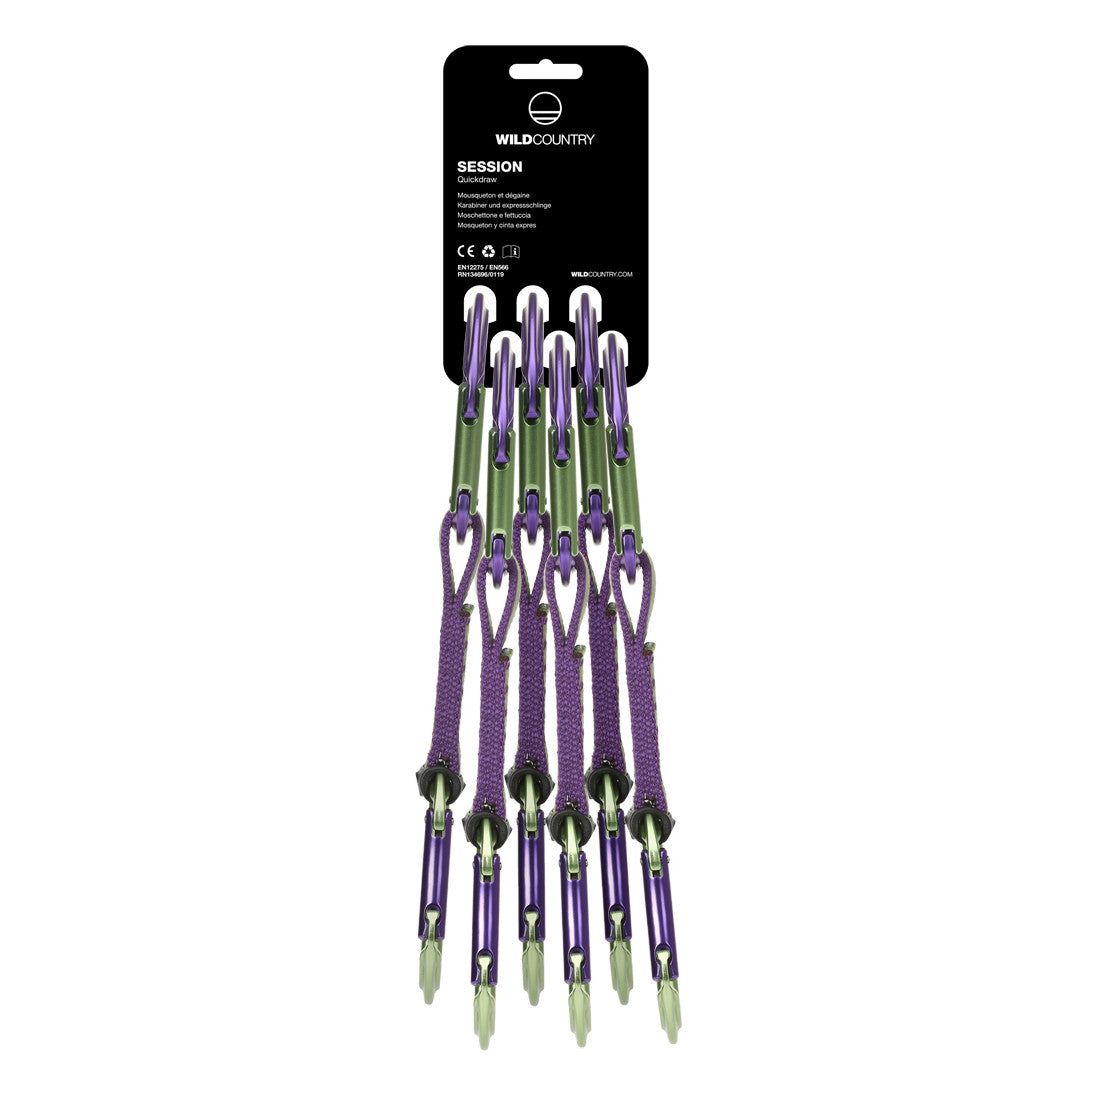 Wild Country Session Quickdraw 6-Pack in purple and green